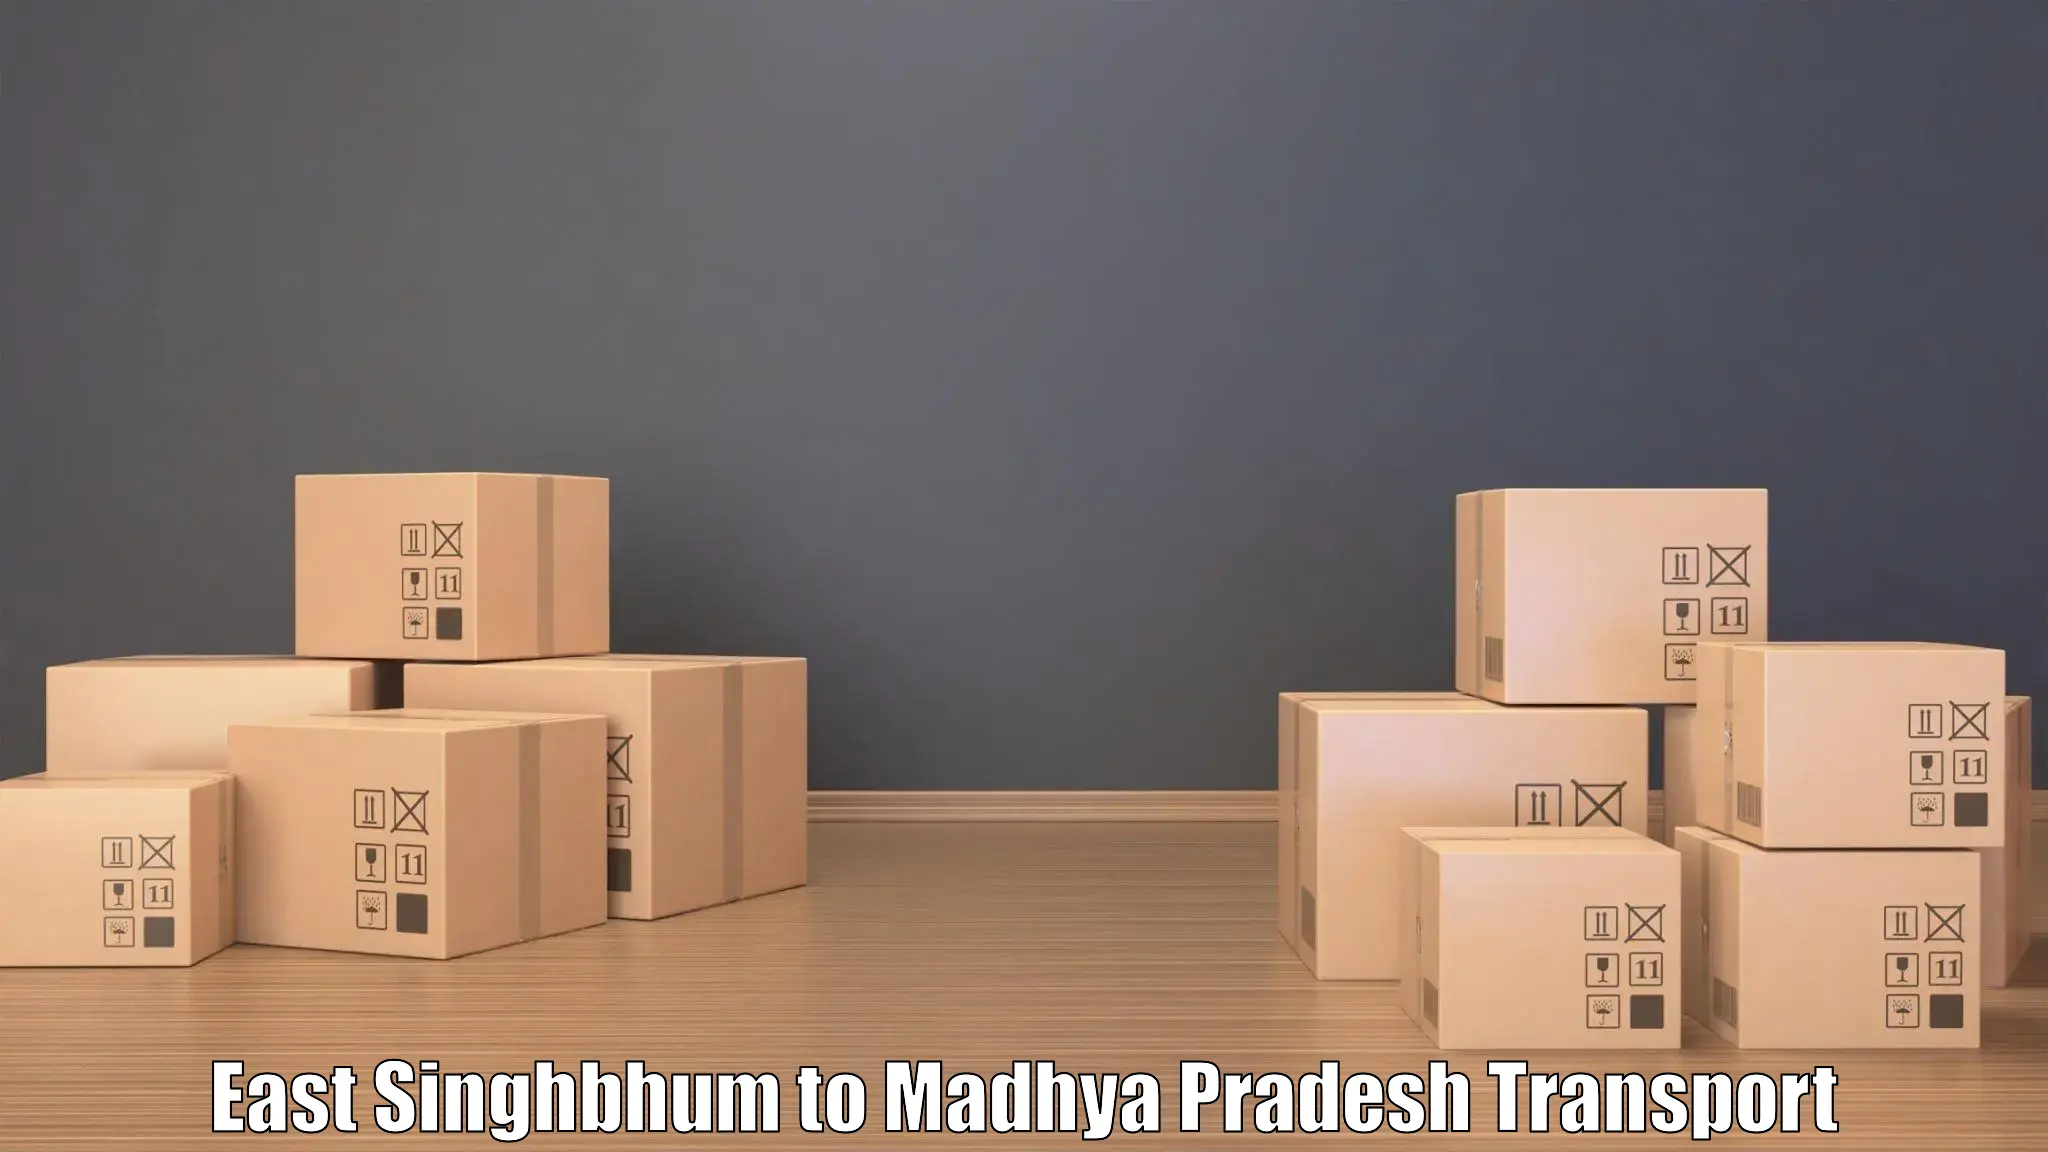 Goods delivery service East Singhbhum to Multai